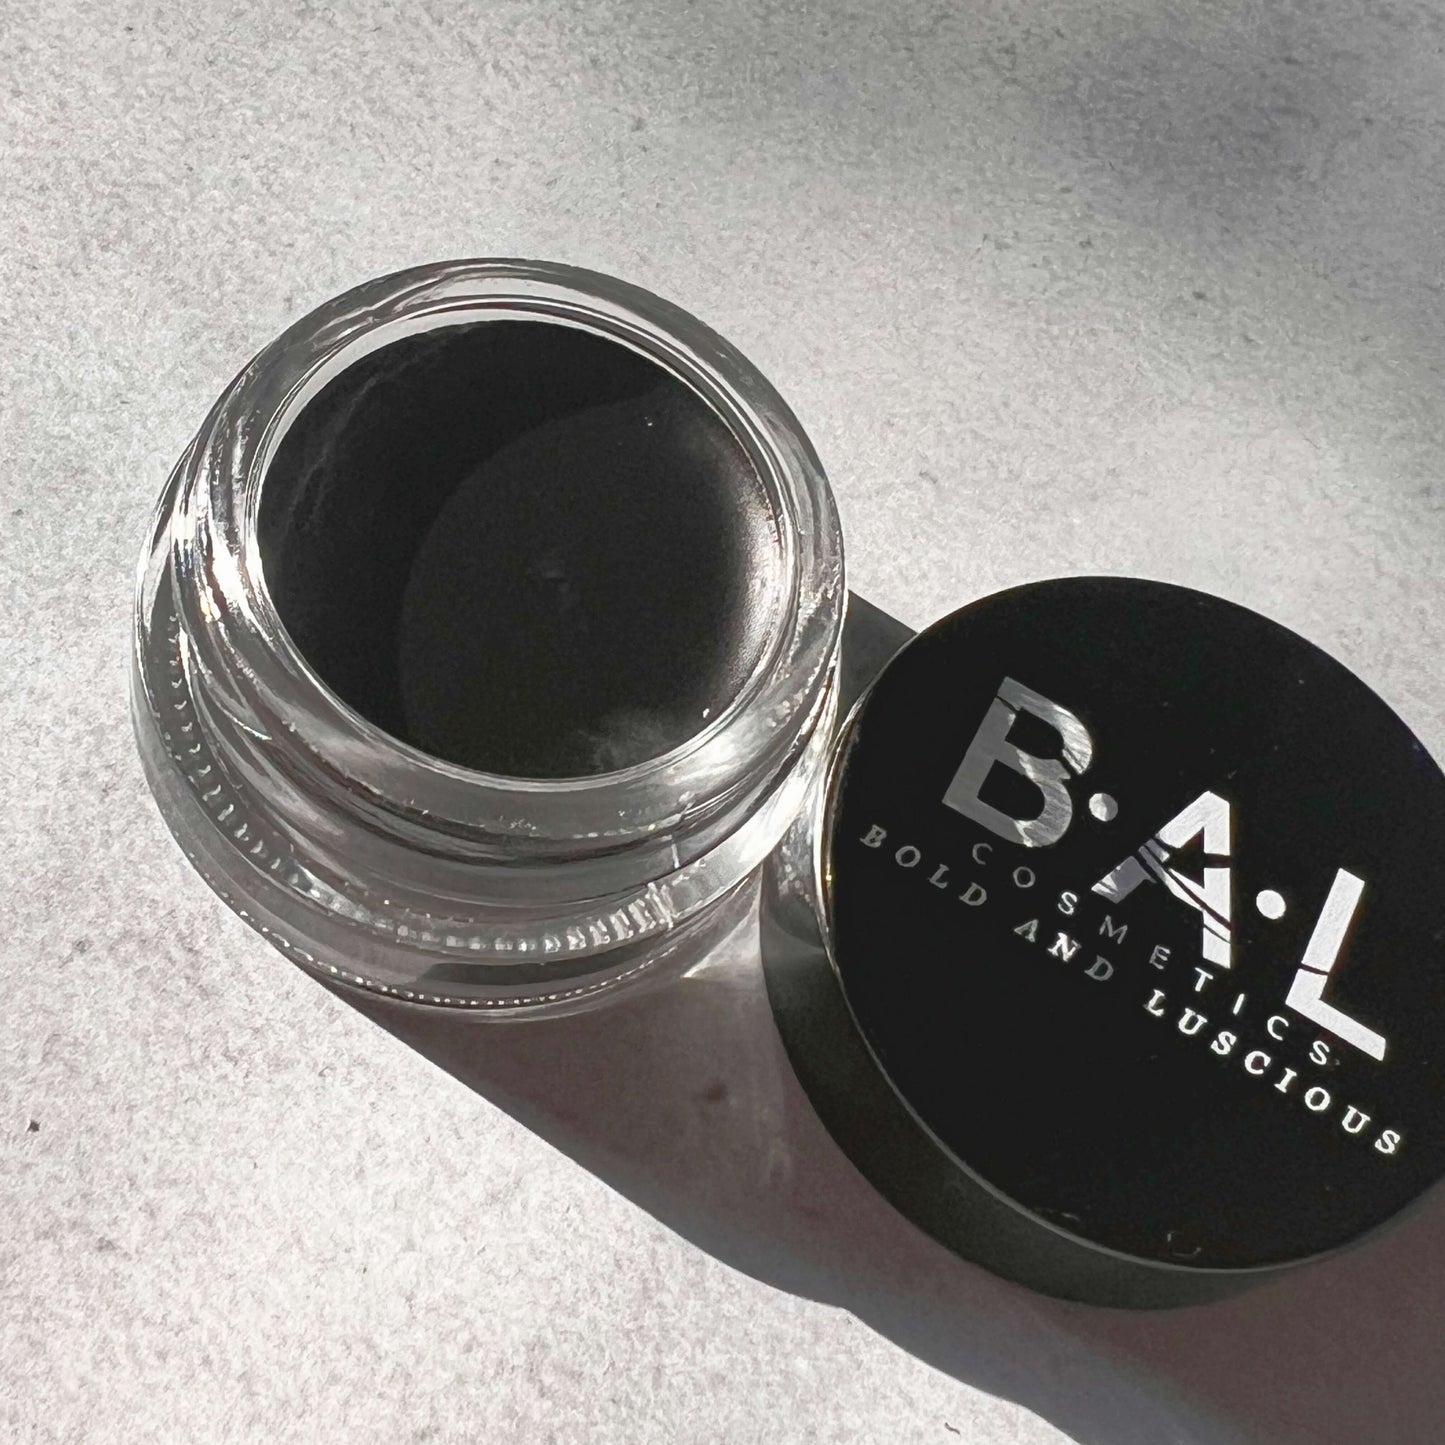 Black Gel Eyeliner in a small glass pot. the Logo for Bold and Luscious Cosmetics is visible on the lid. The texture is soft and creamy.